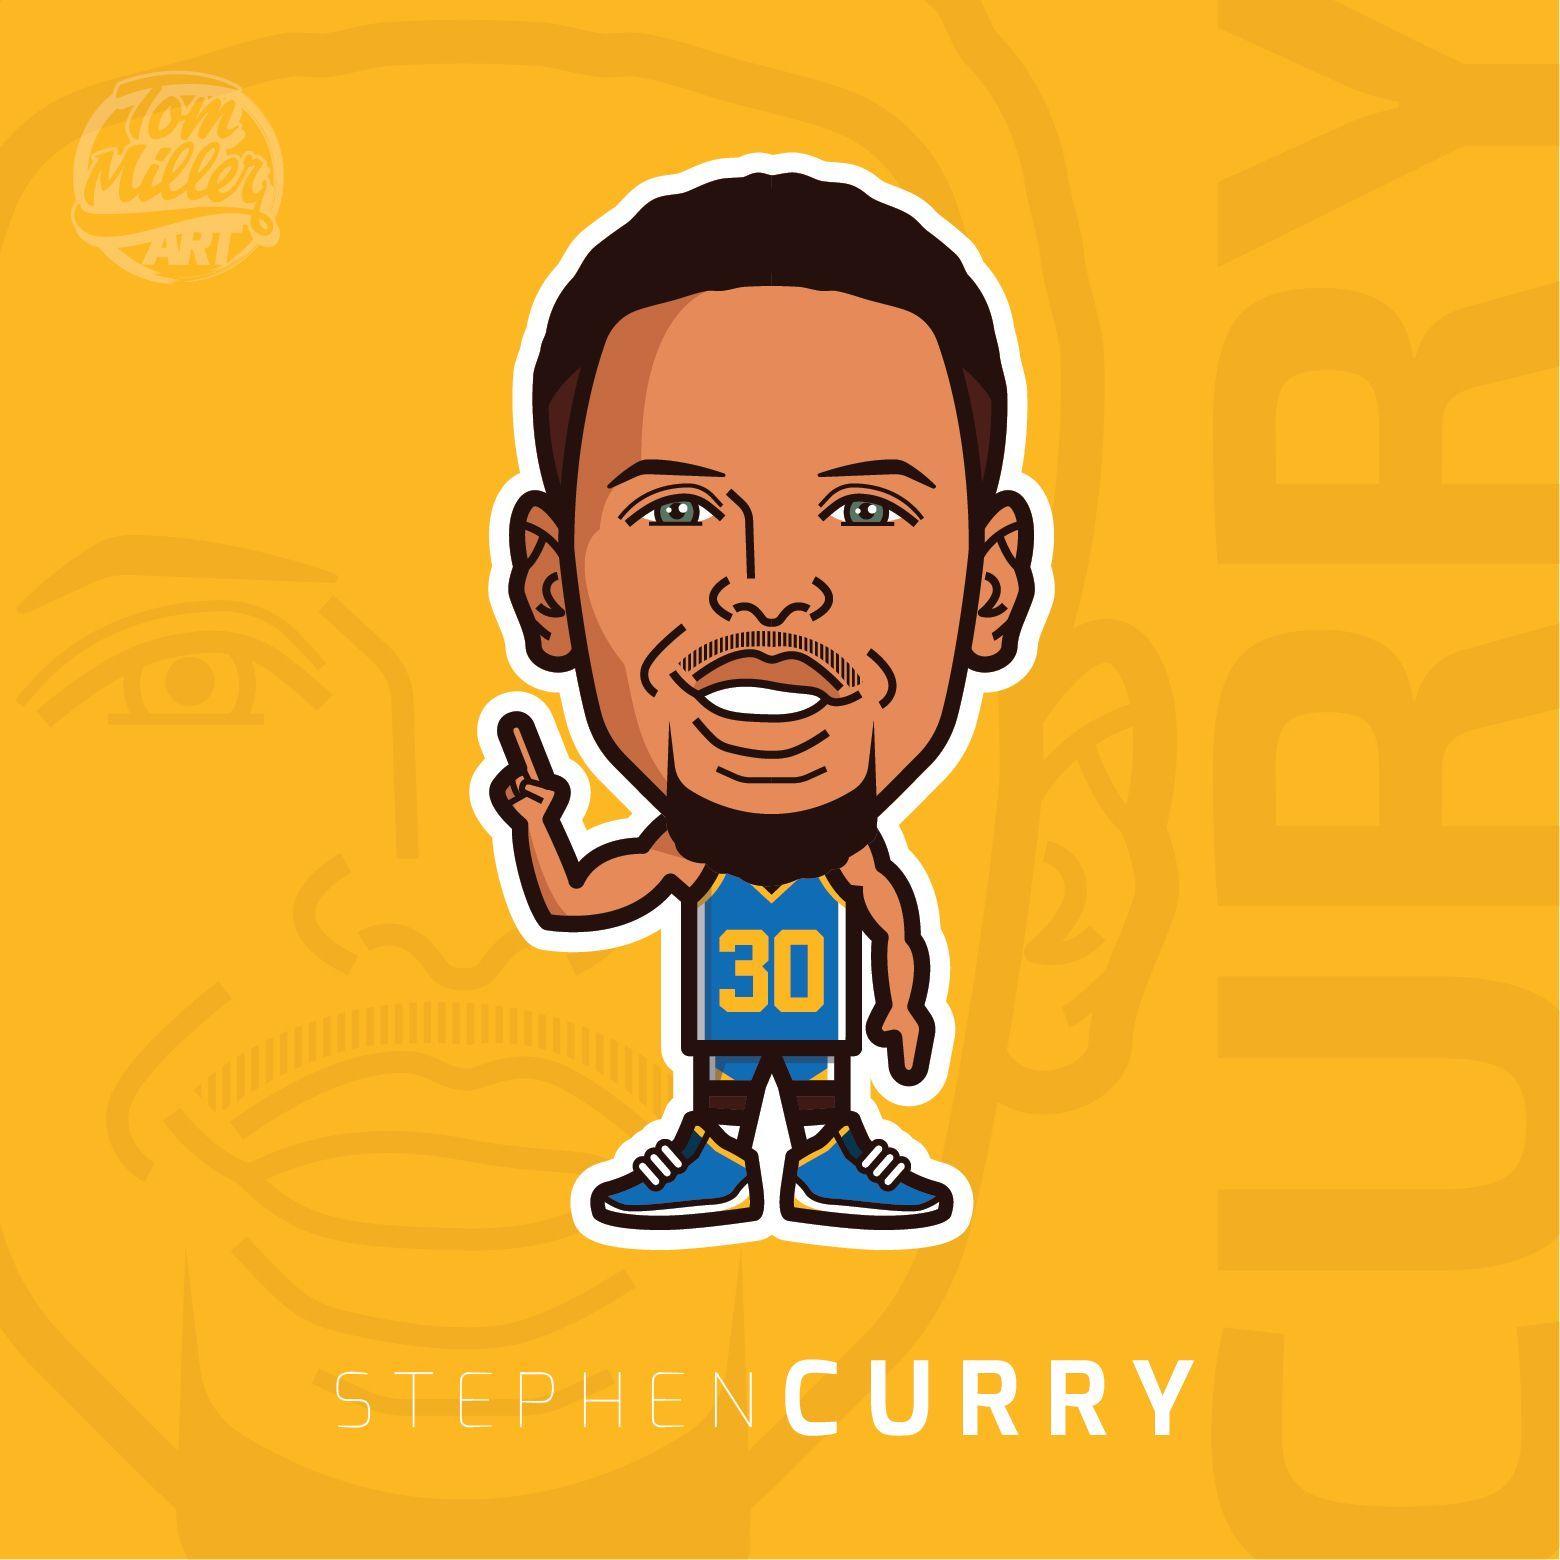 100+] Stephen Curry Cool Wallpapers | Wallpapers.com